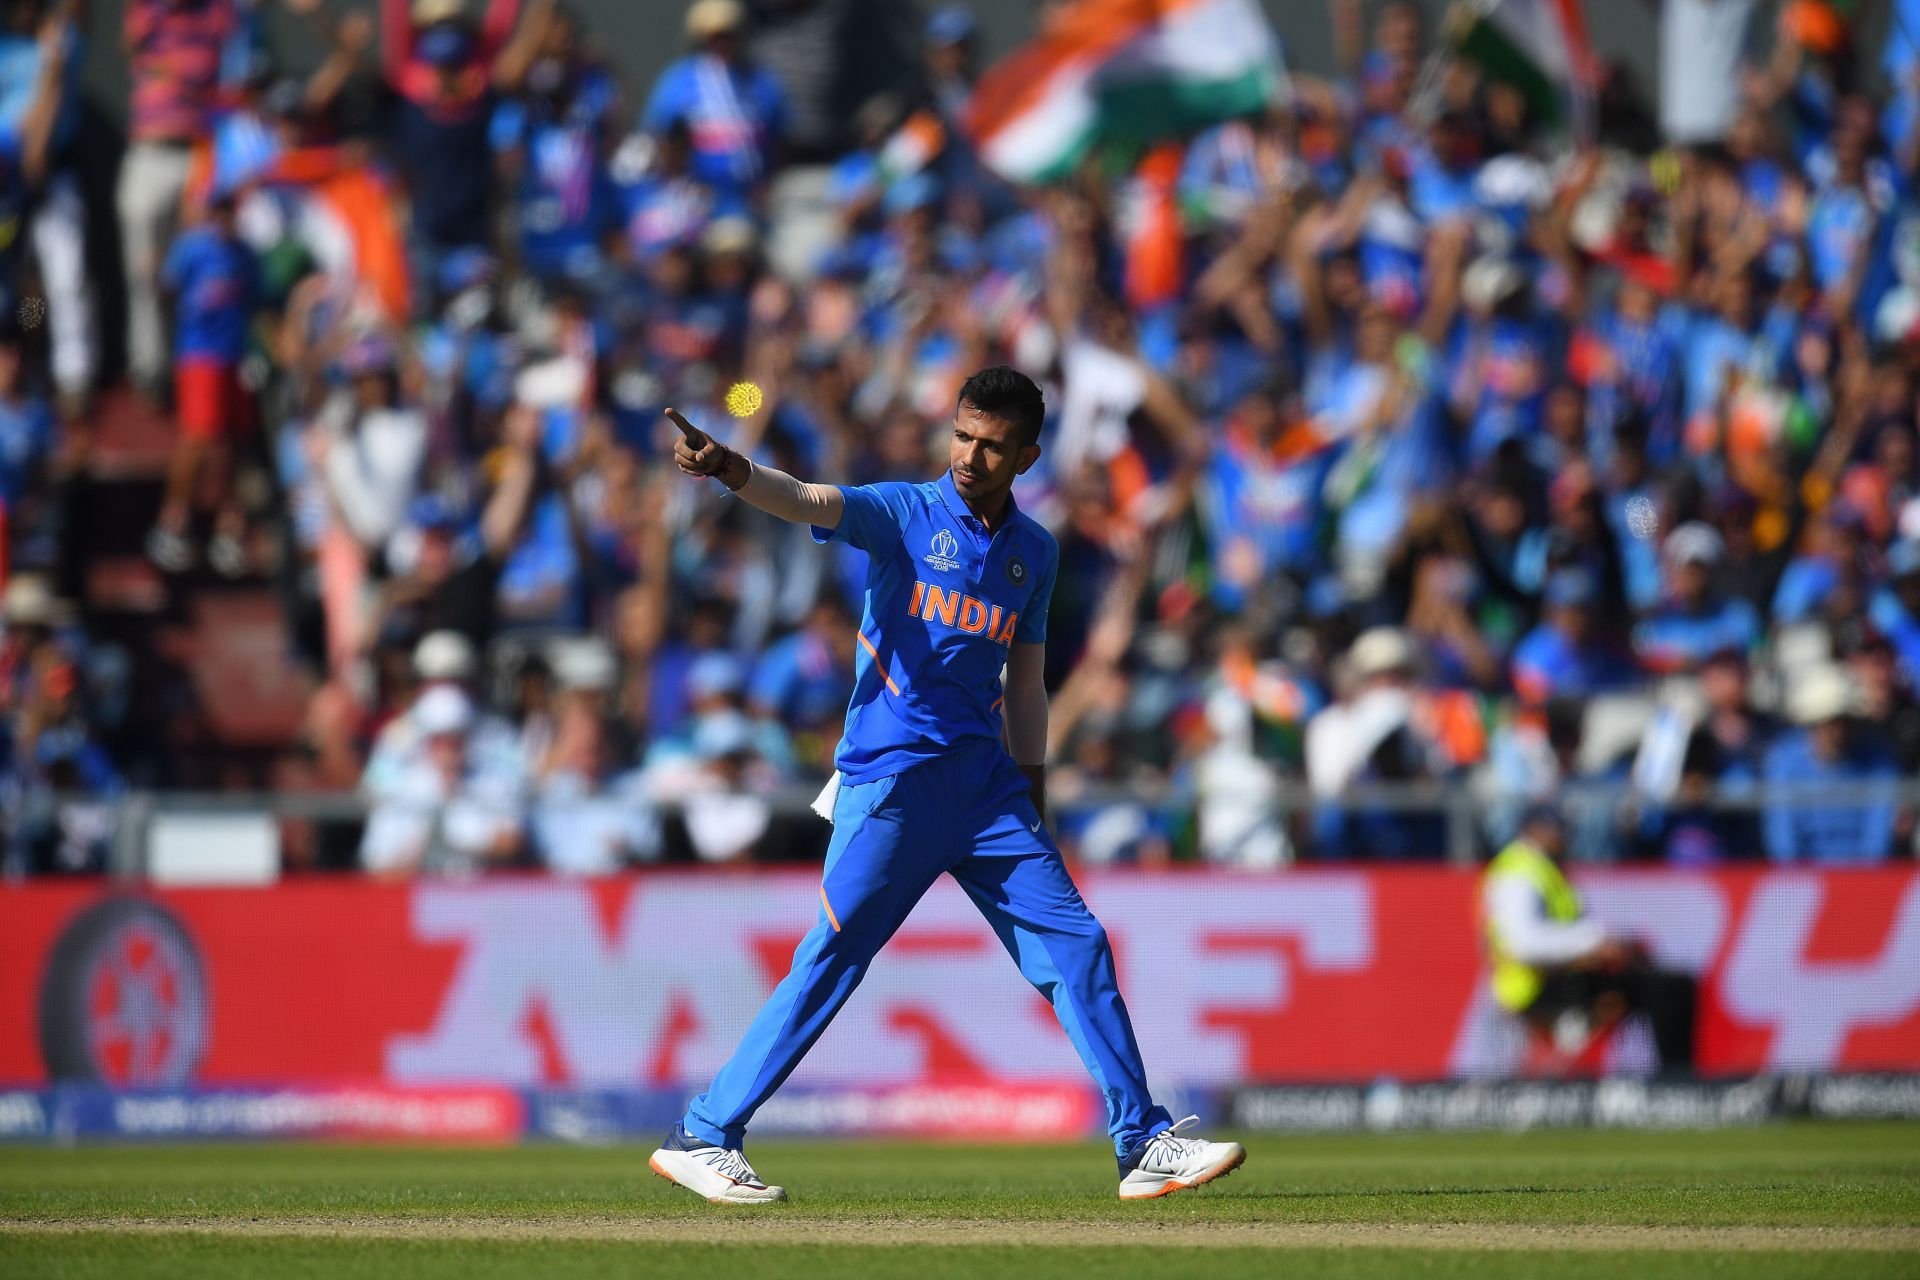 Chahal will be the number 1 spinner for India against South Africa